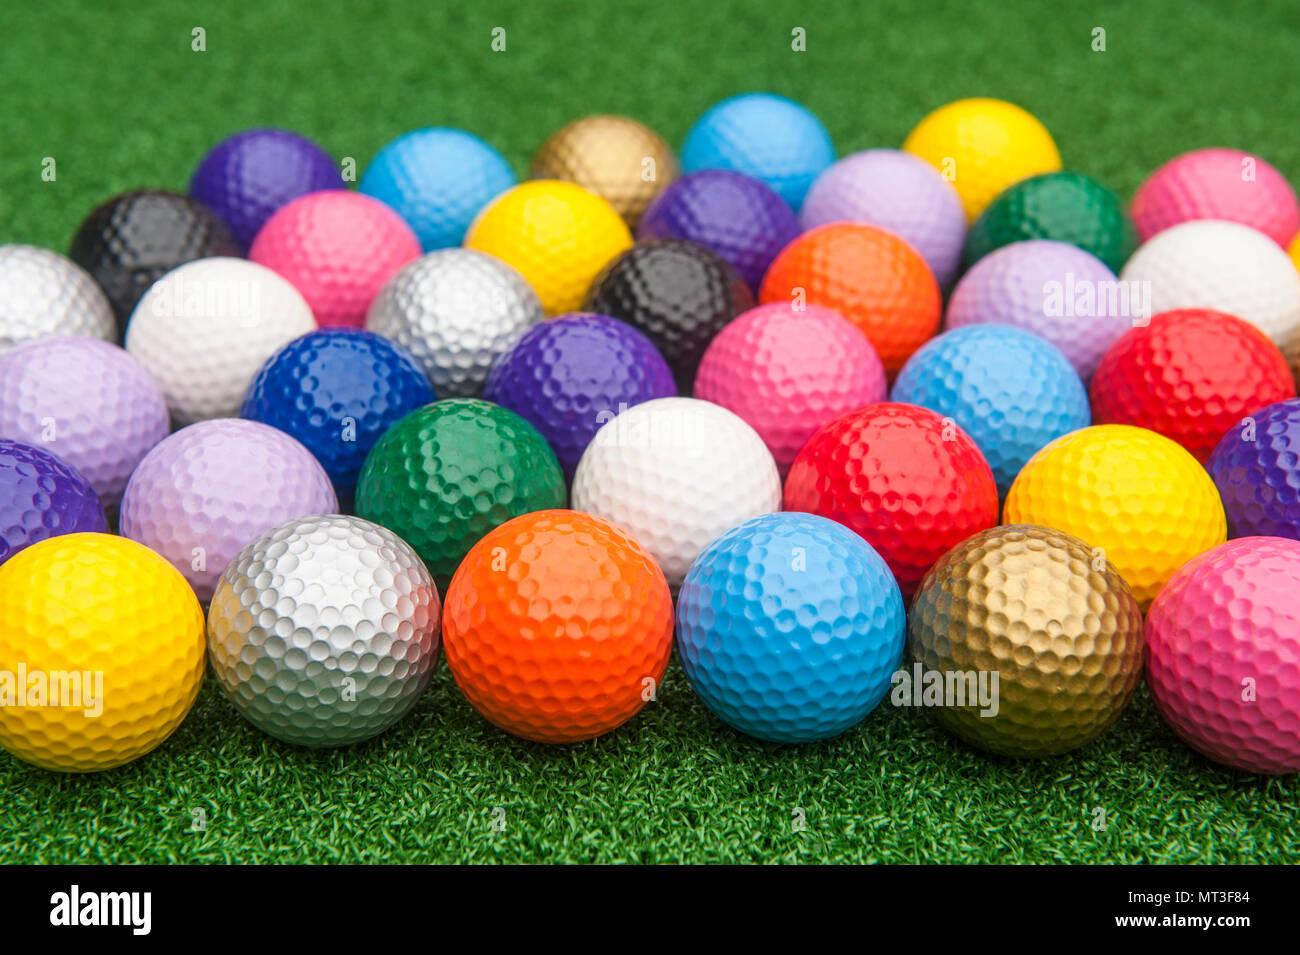 Colorful miniature golf balls on green synthetic grass Stock Photo